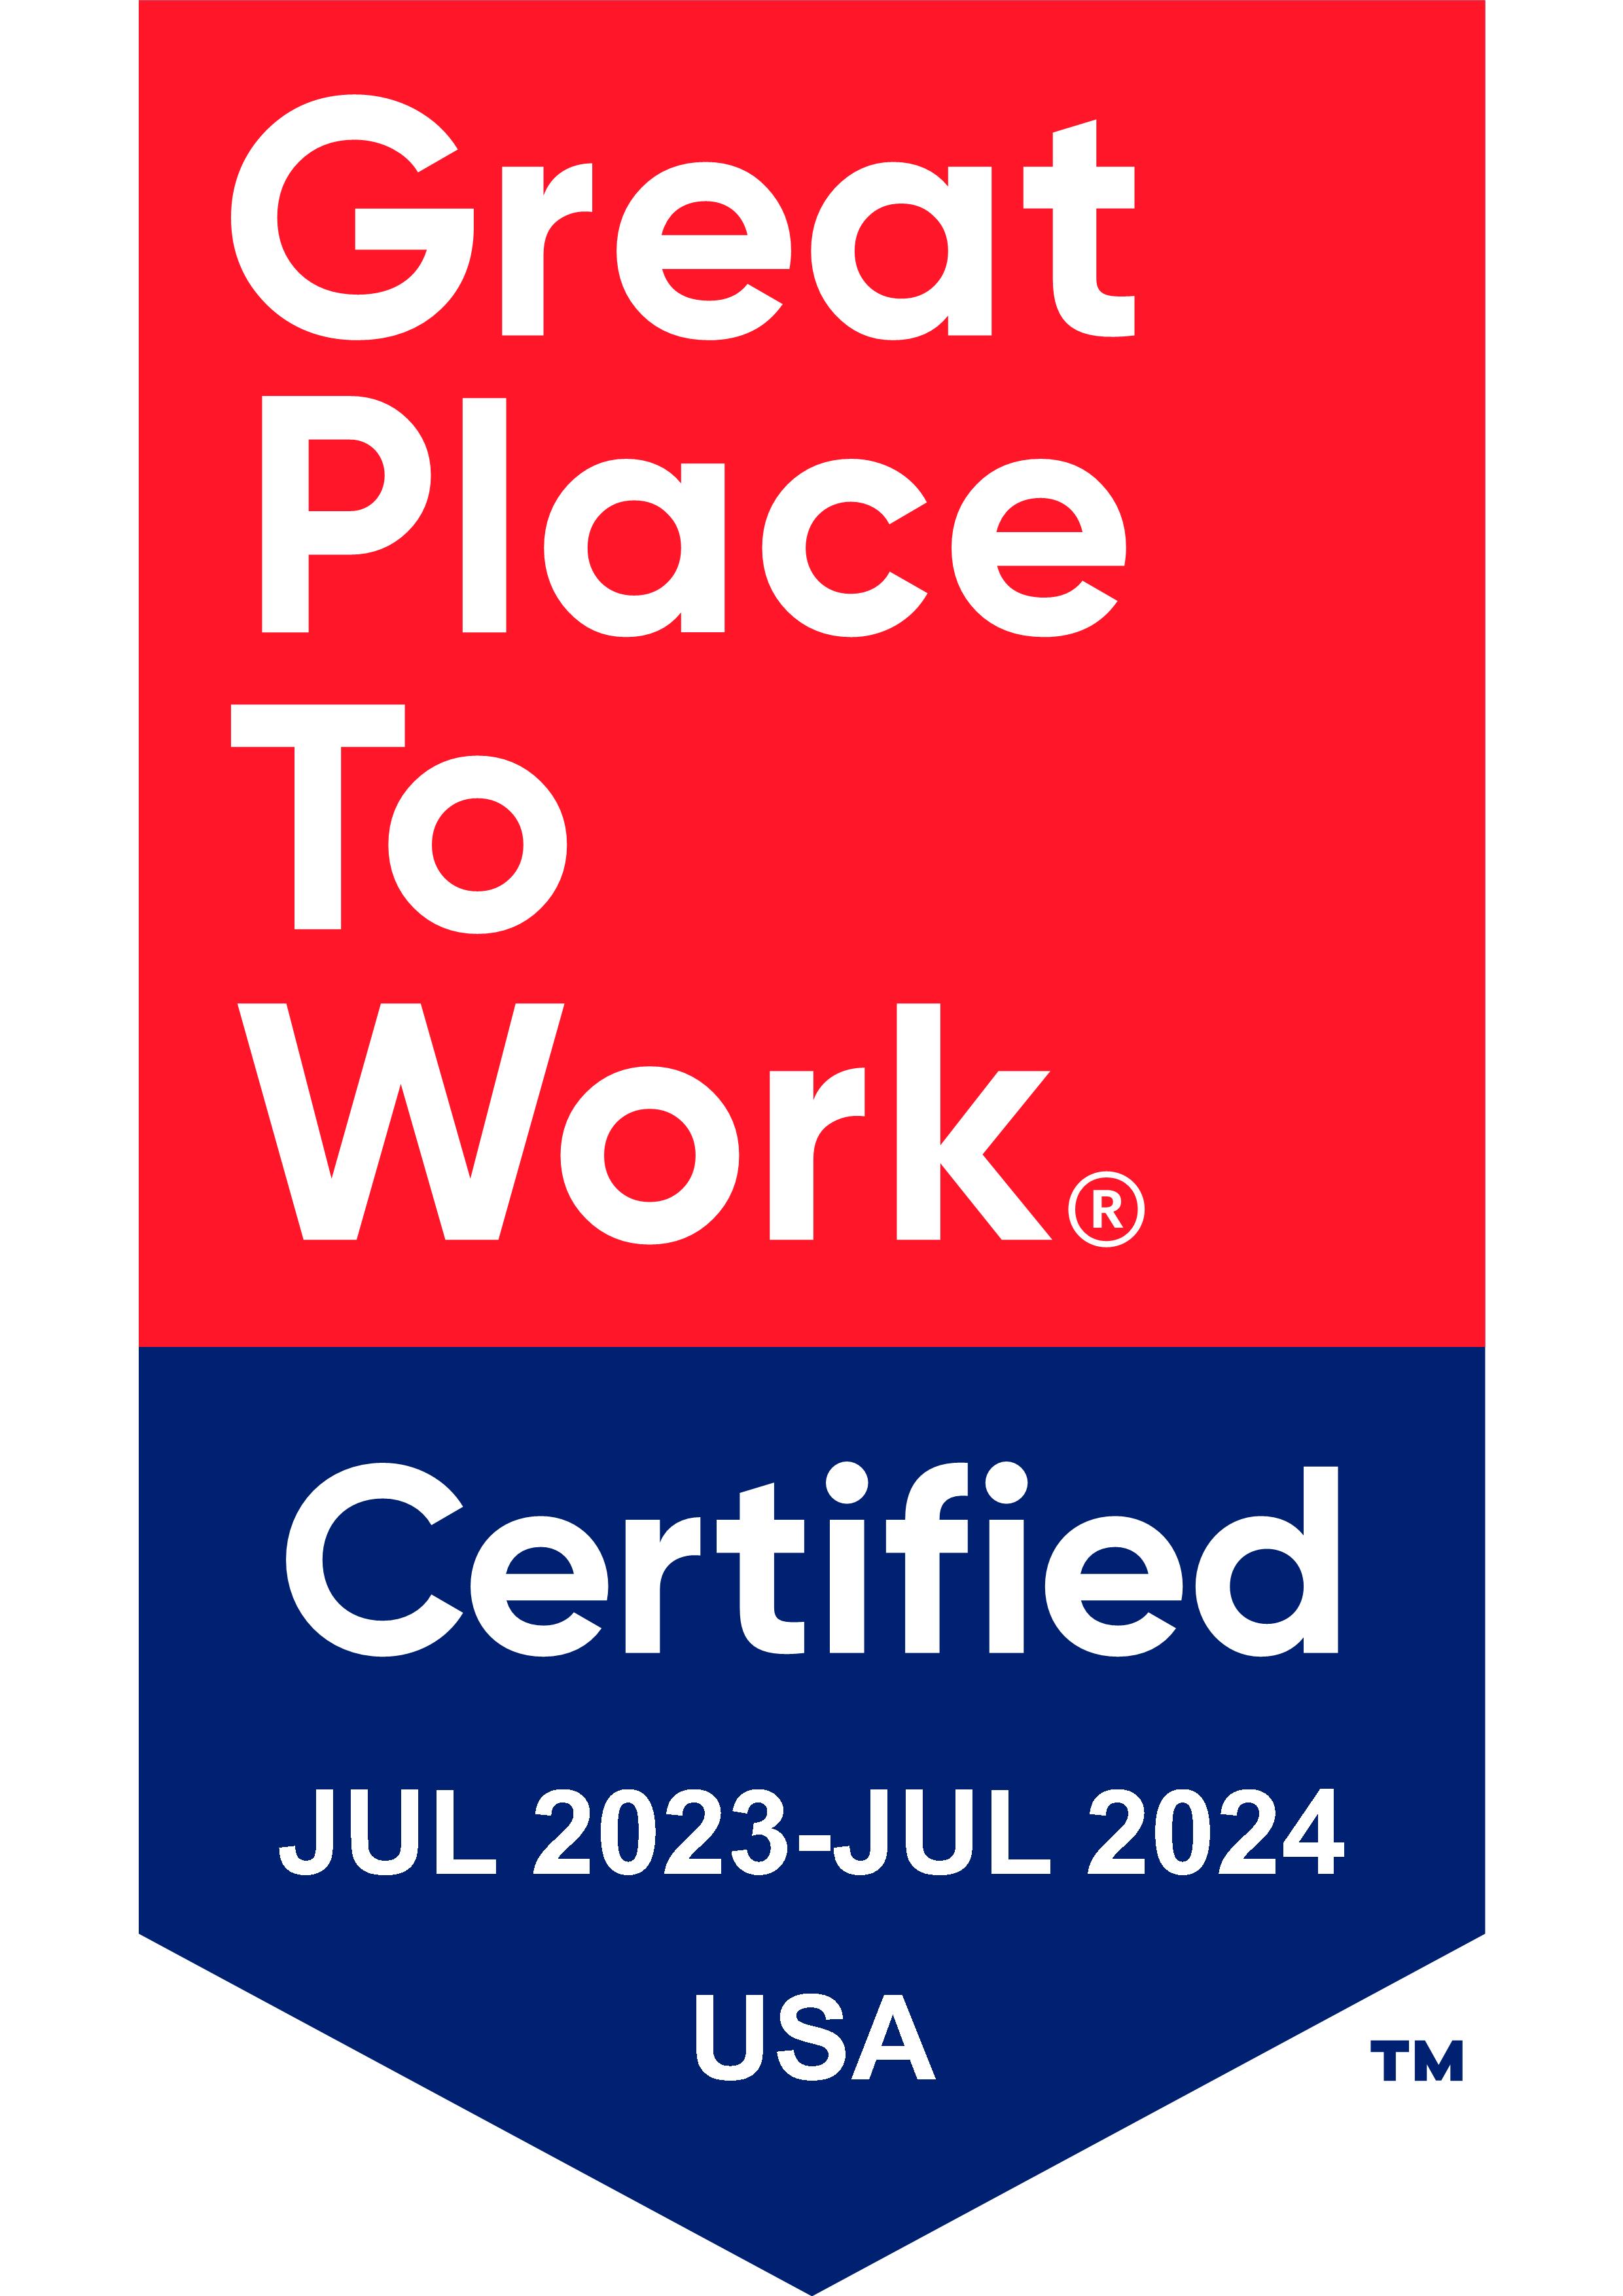 Great Place To Work for U.S.